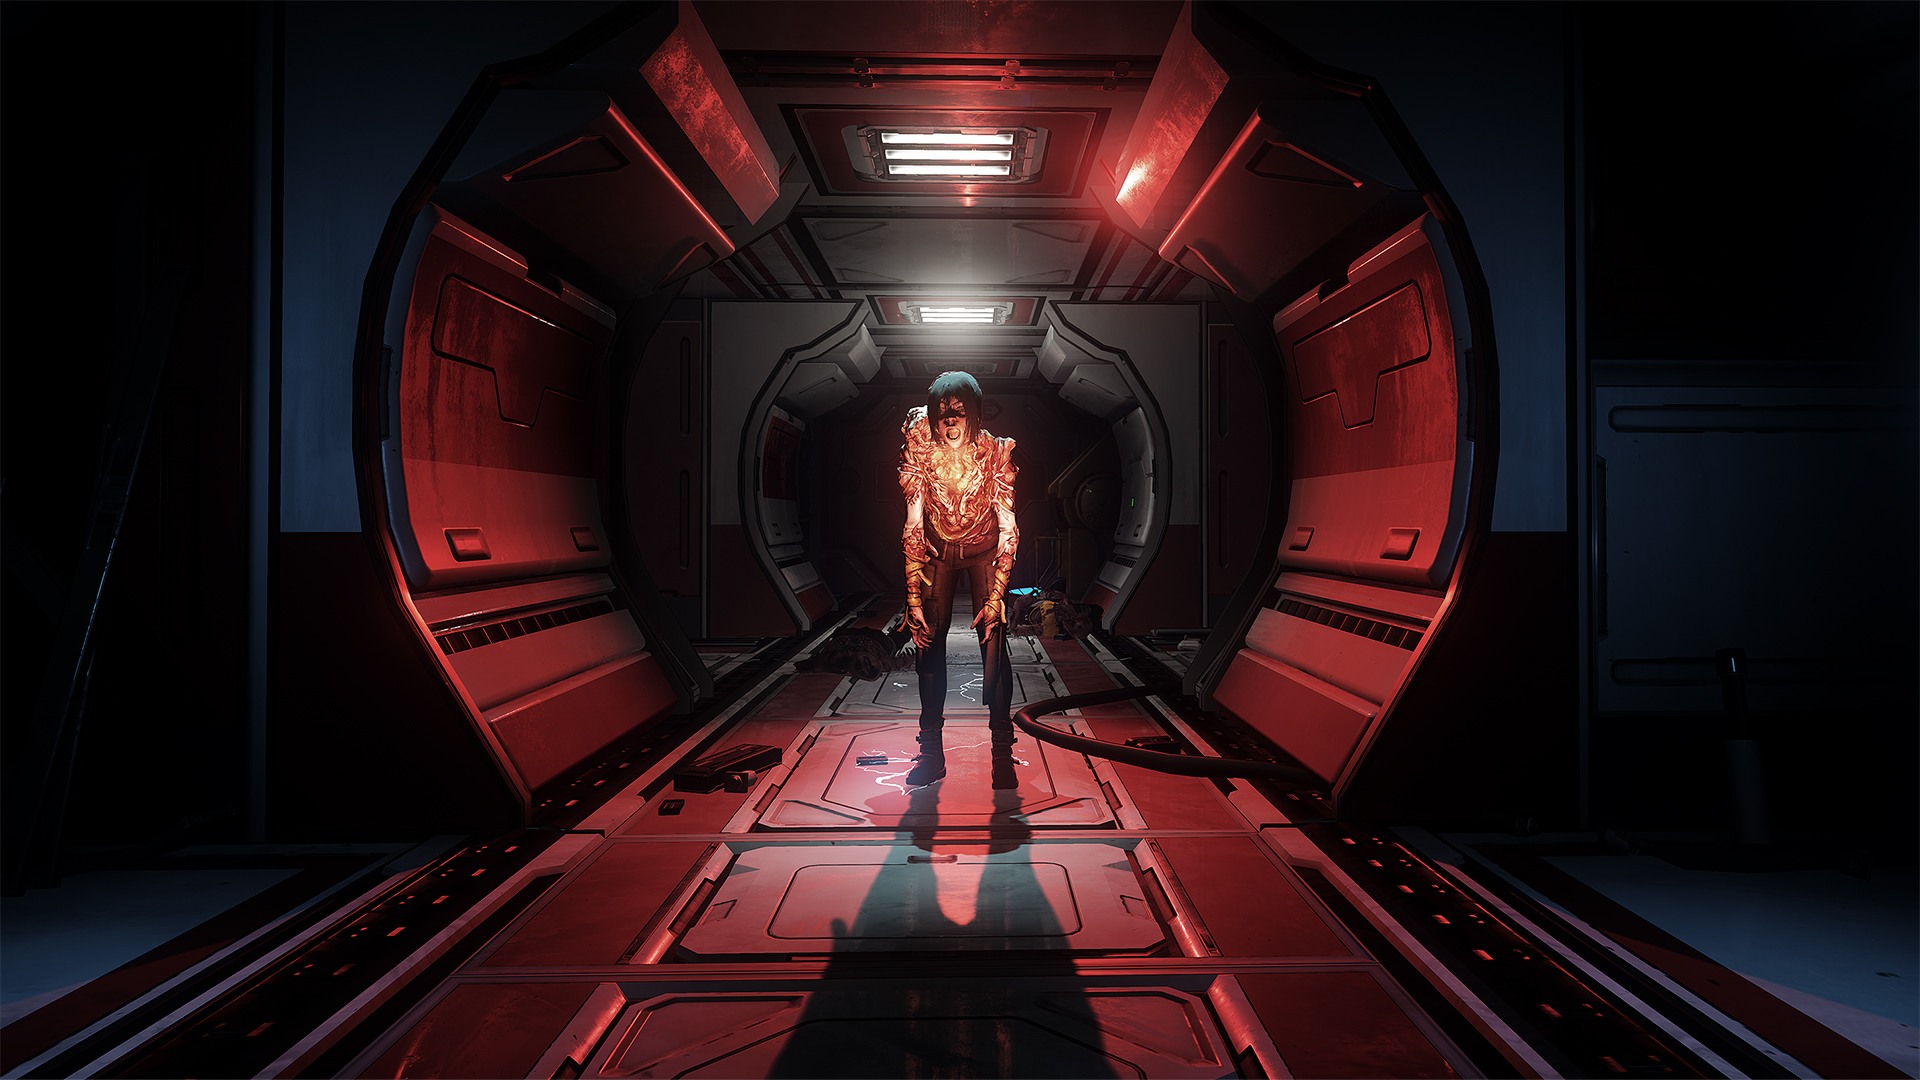 The Persistence July 2018 #4